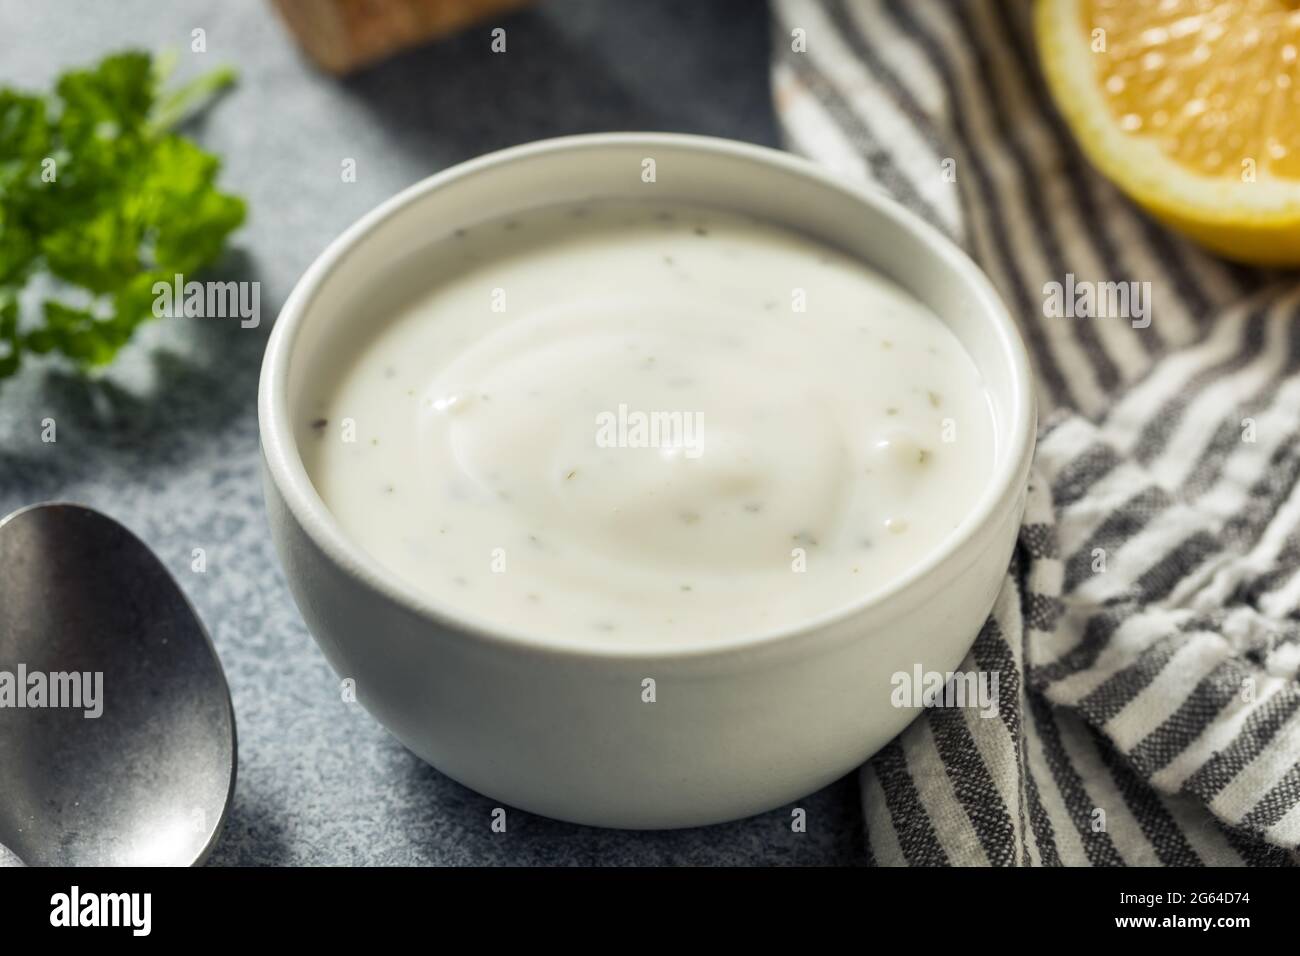 Homemade Organic Ranch Dressing in a Bowl Stock Photo